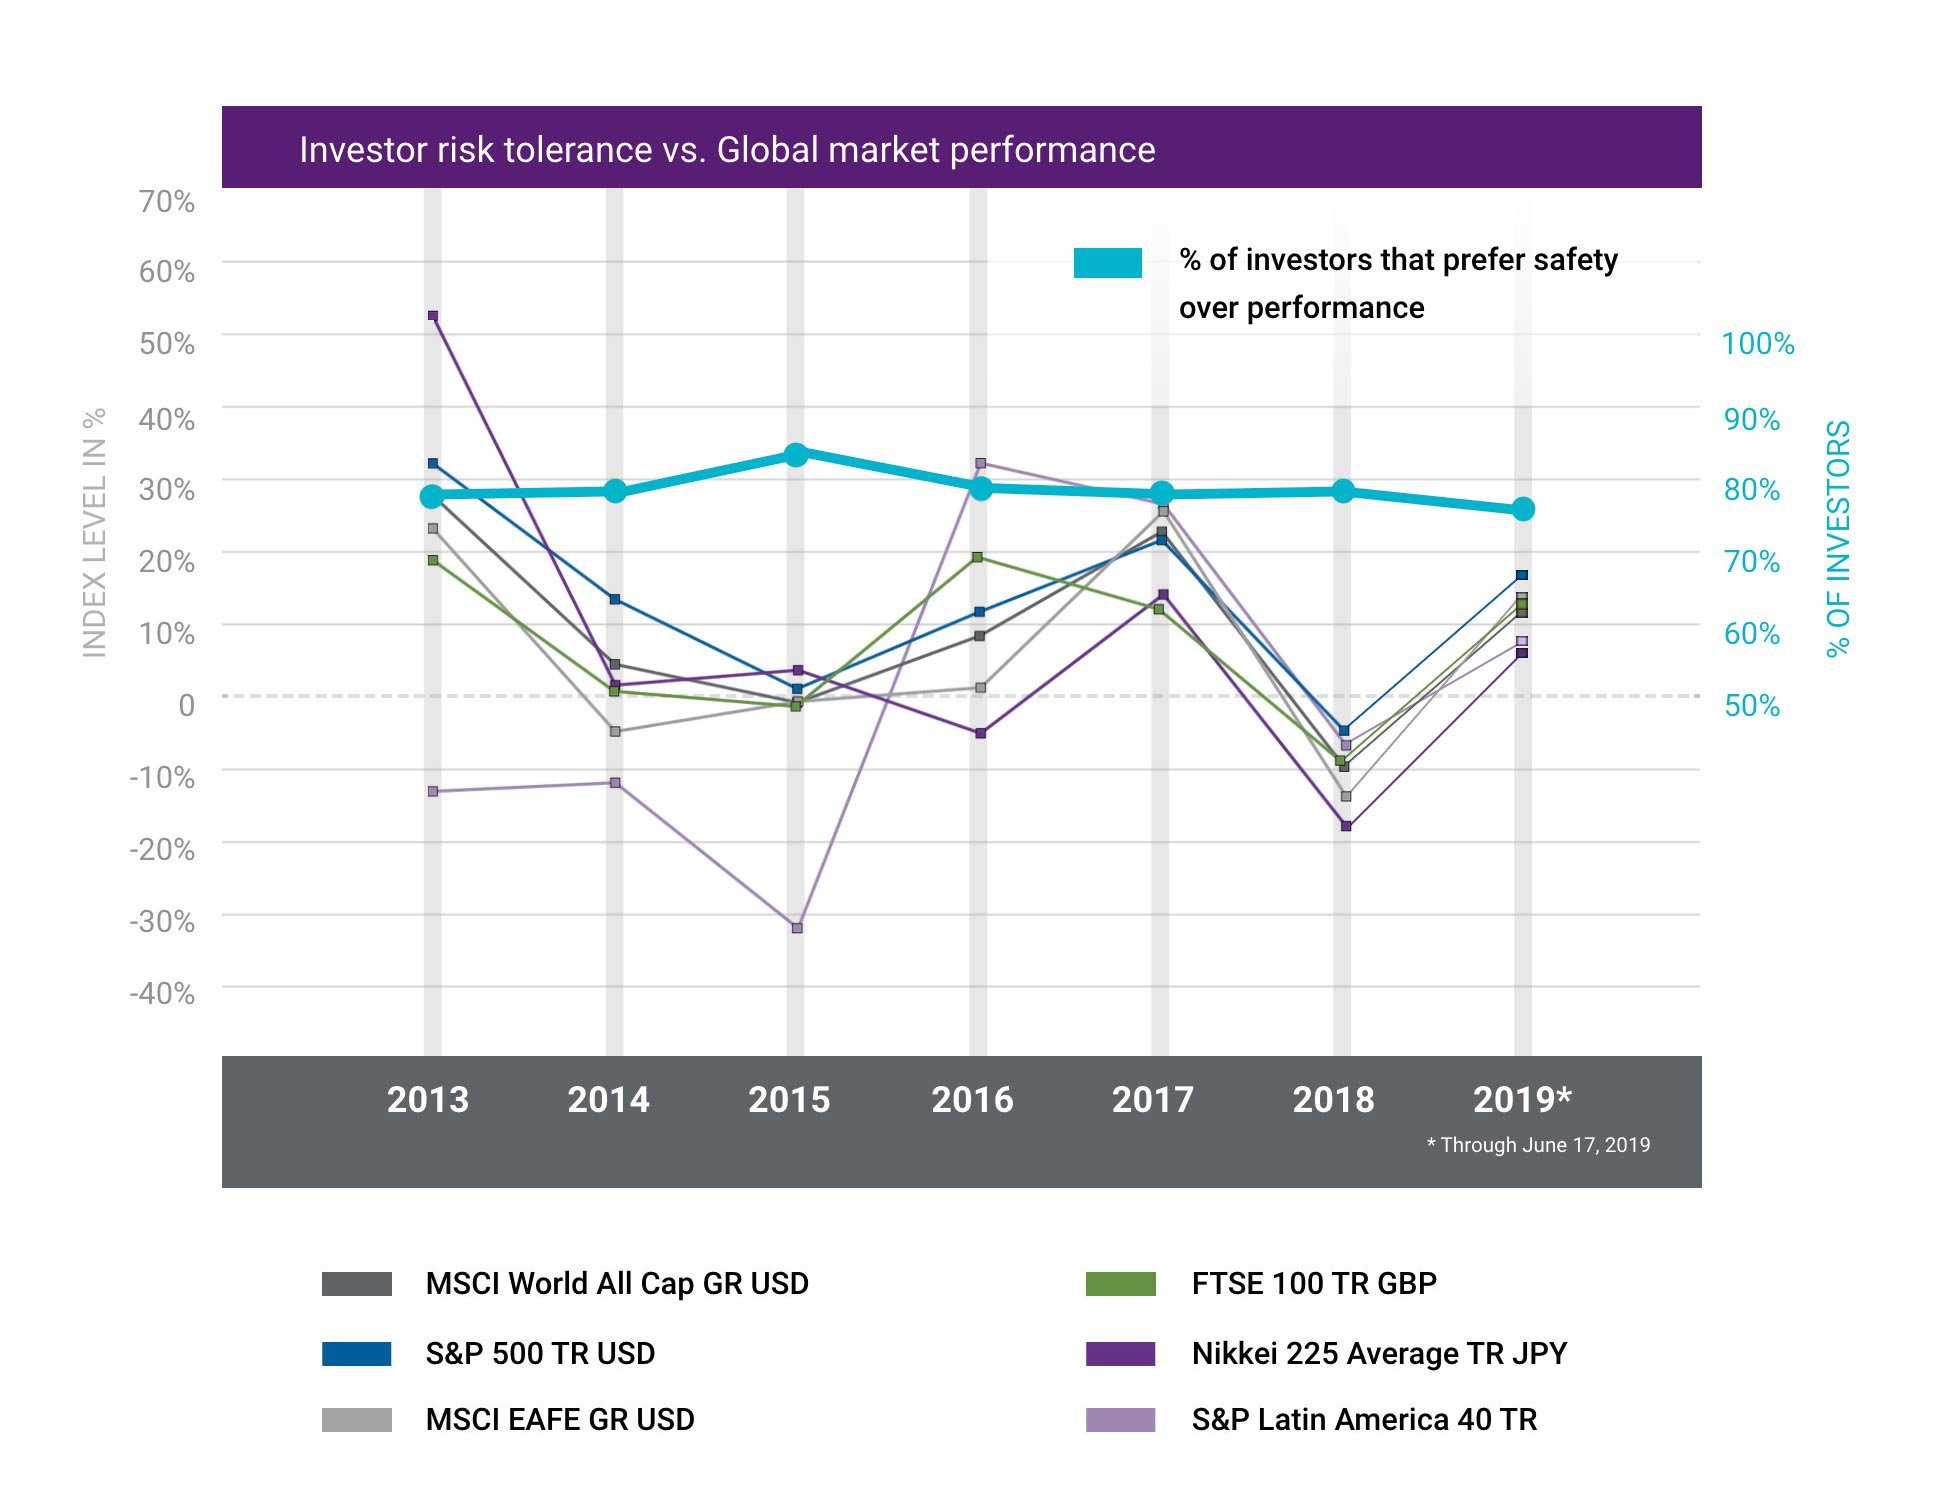 Investor risk tolerance versus global market performance line chart with data from 2013 through June 2019, highlights the percentage of investors that prefer safety over performance